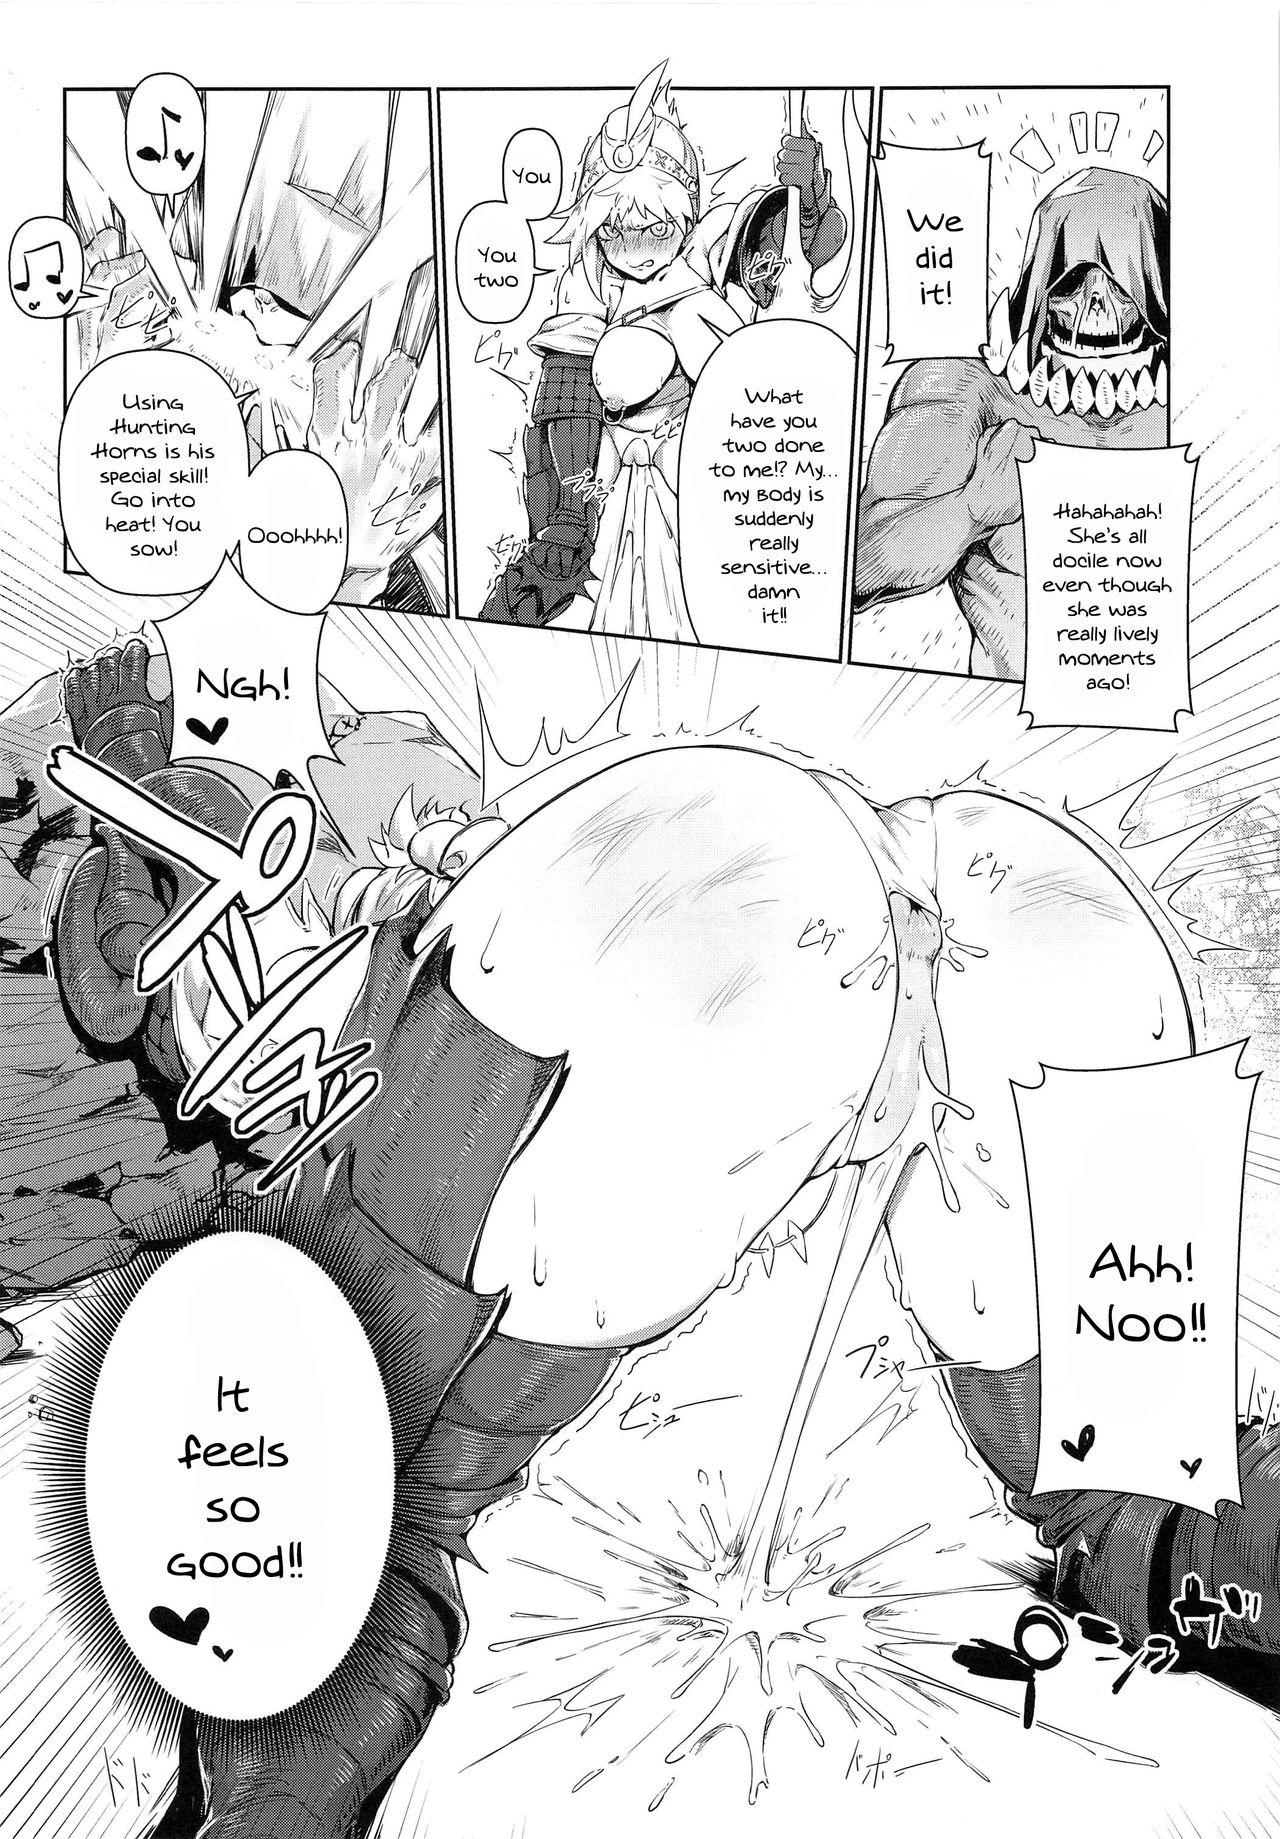 Trans Extreme Anal Hunter - Monster hunter 18 Porn - Page 9